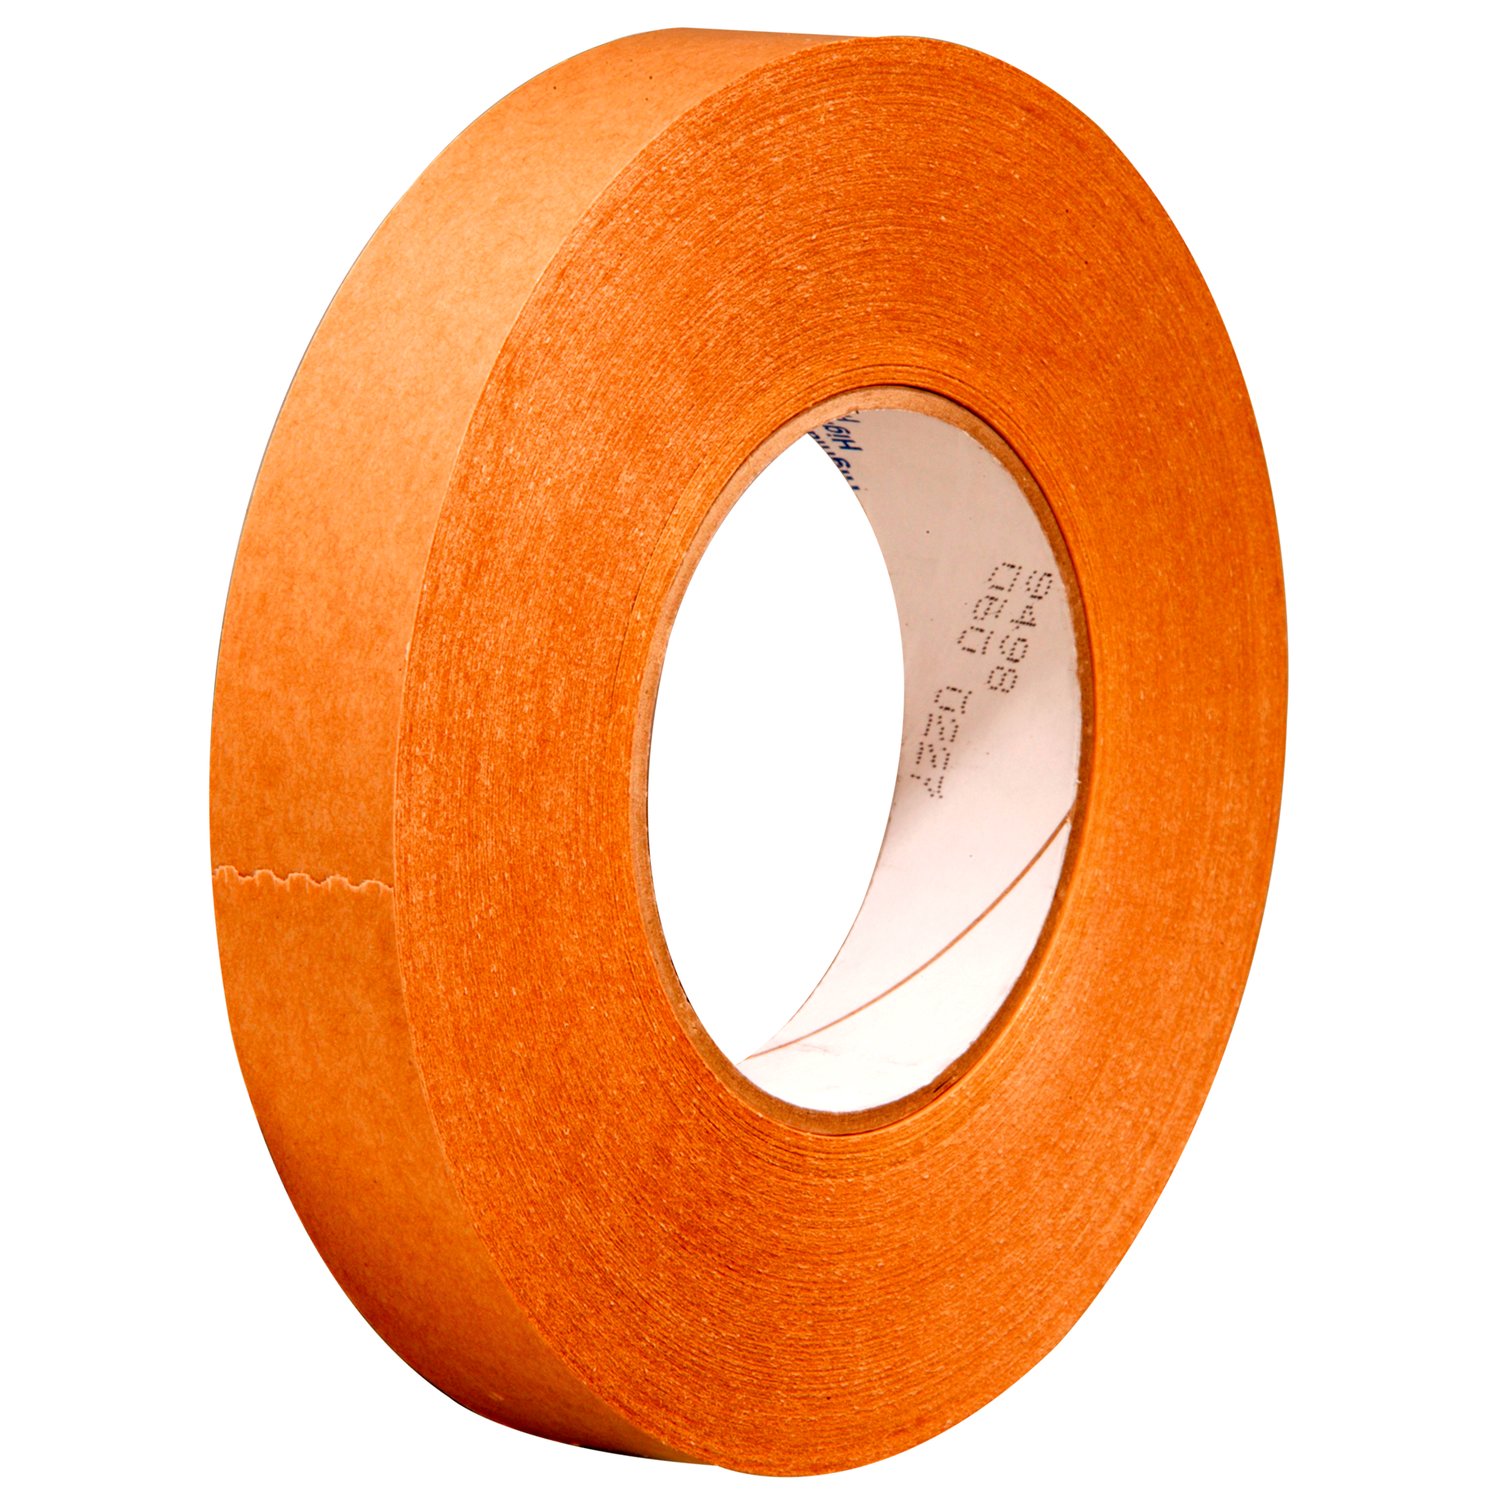 7000123445 - 3M Adhesive Transfer Tape 9498, Clear, 3/4 in x 120 yd, 2 mil, 48 rolls
per case